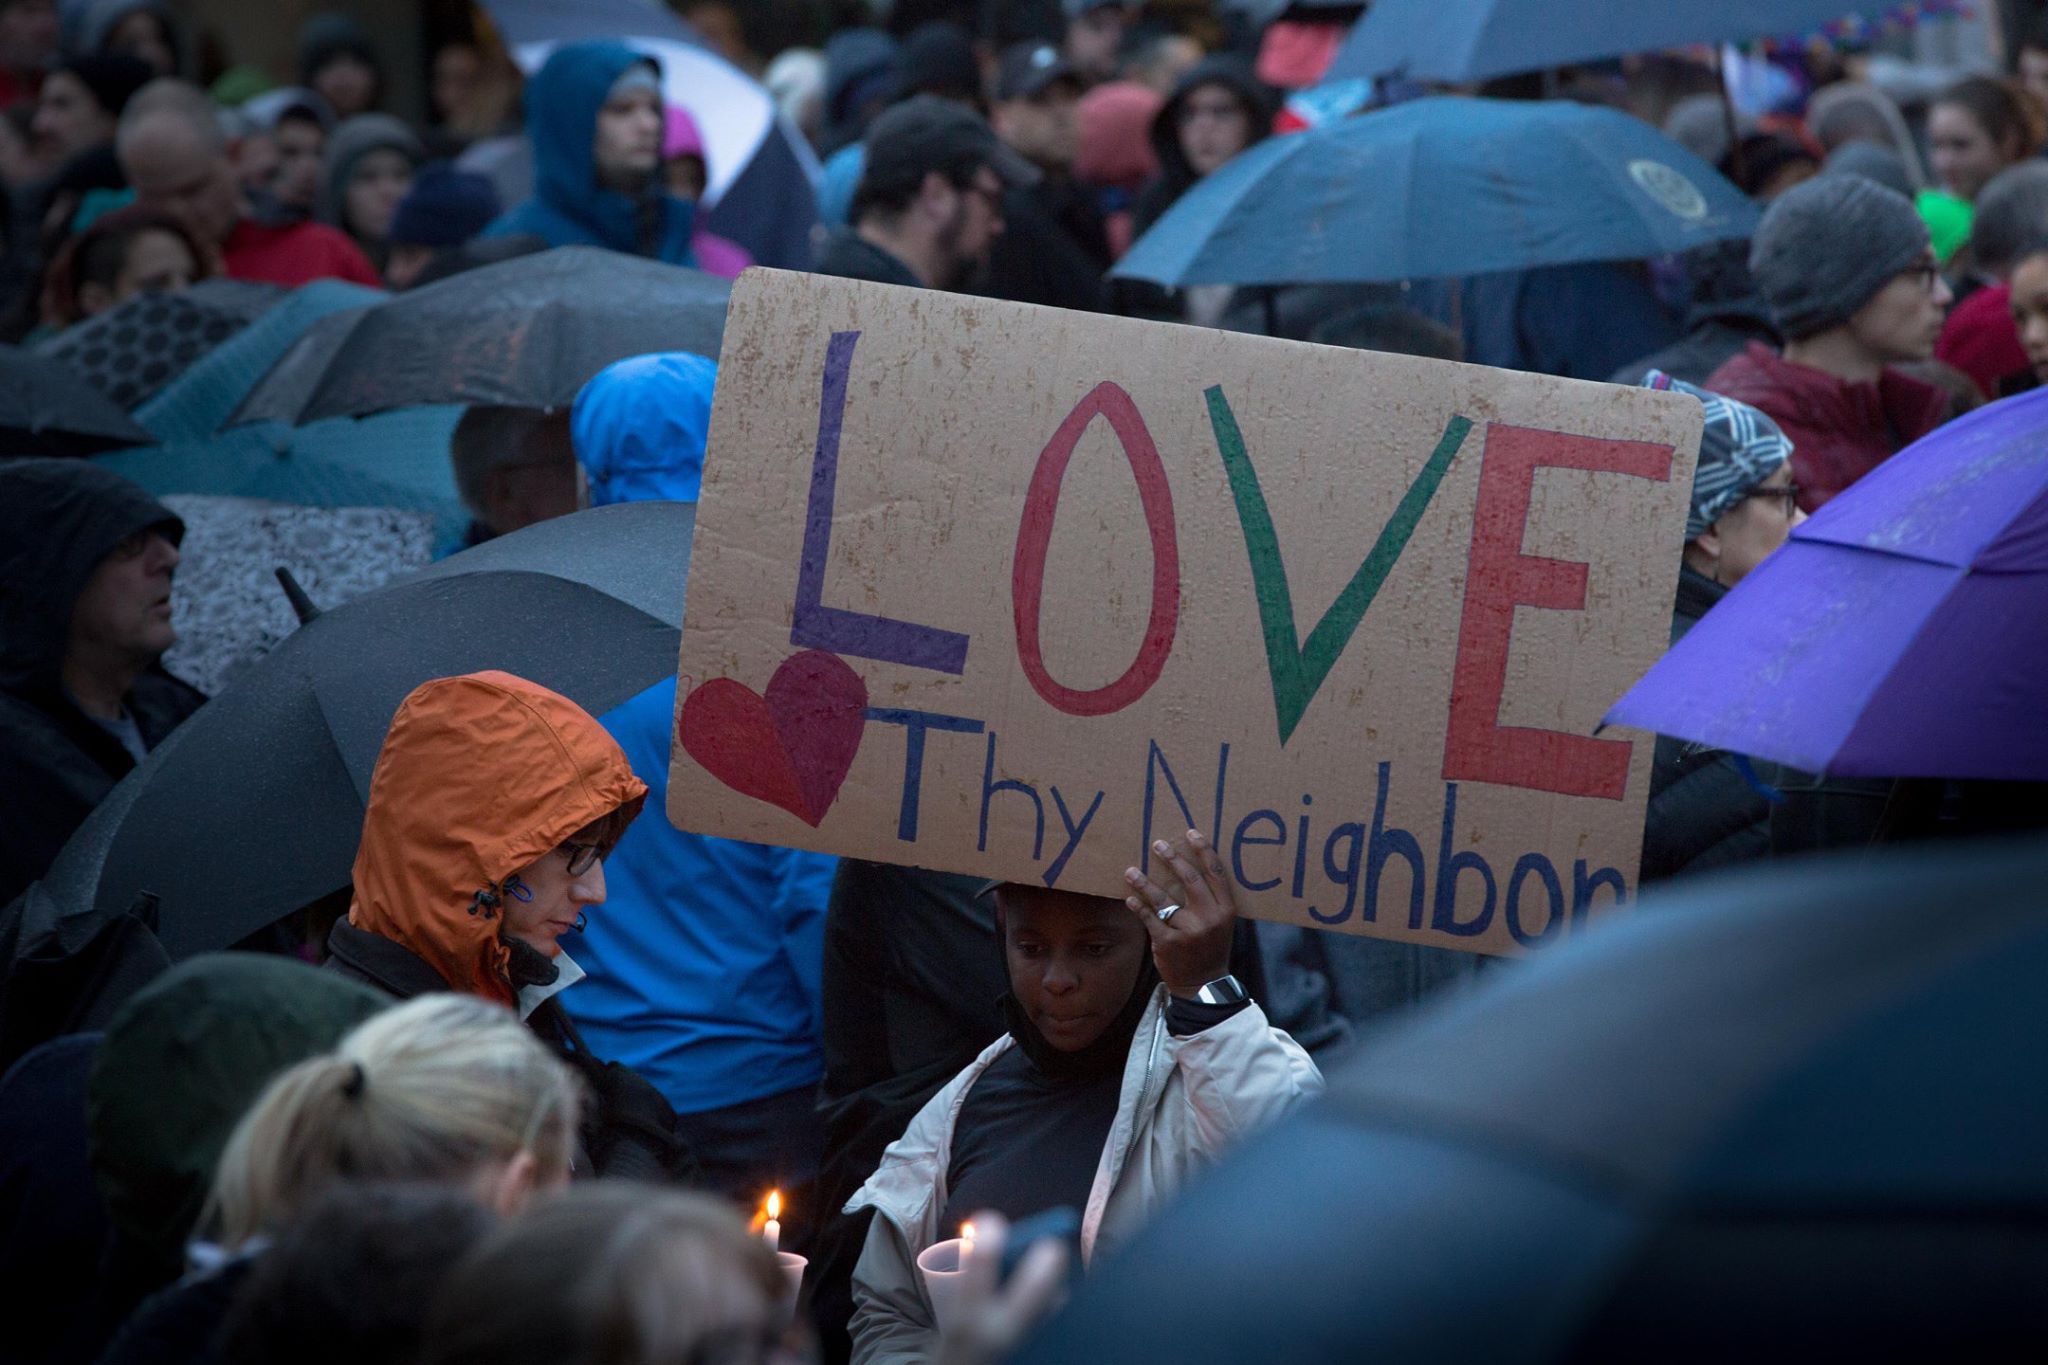 Sign at the Saturday night vigil in Pittsburgh. (Photo by Heather Mull/PublicSource)